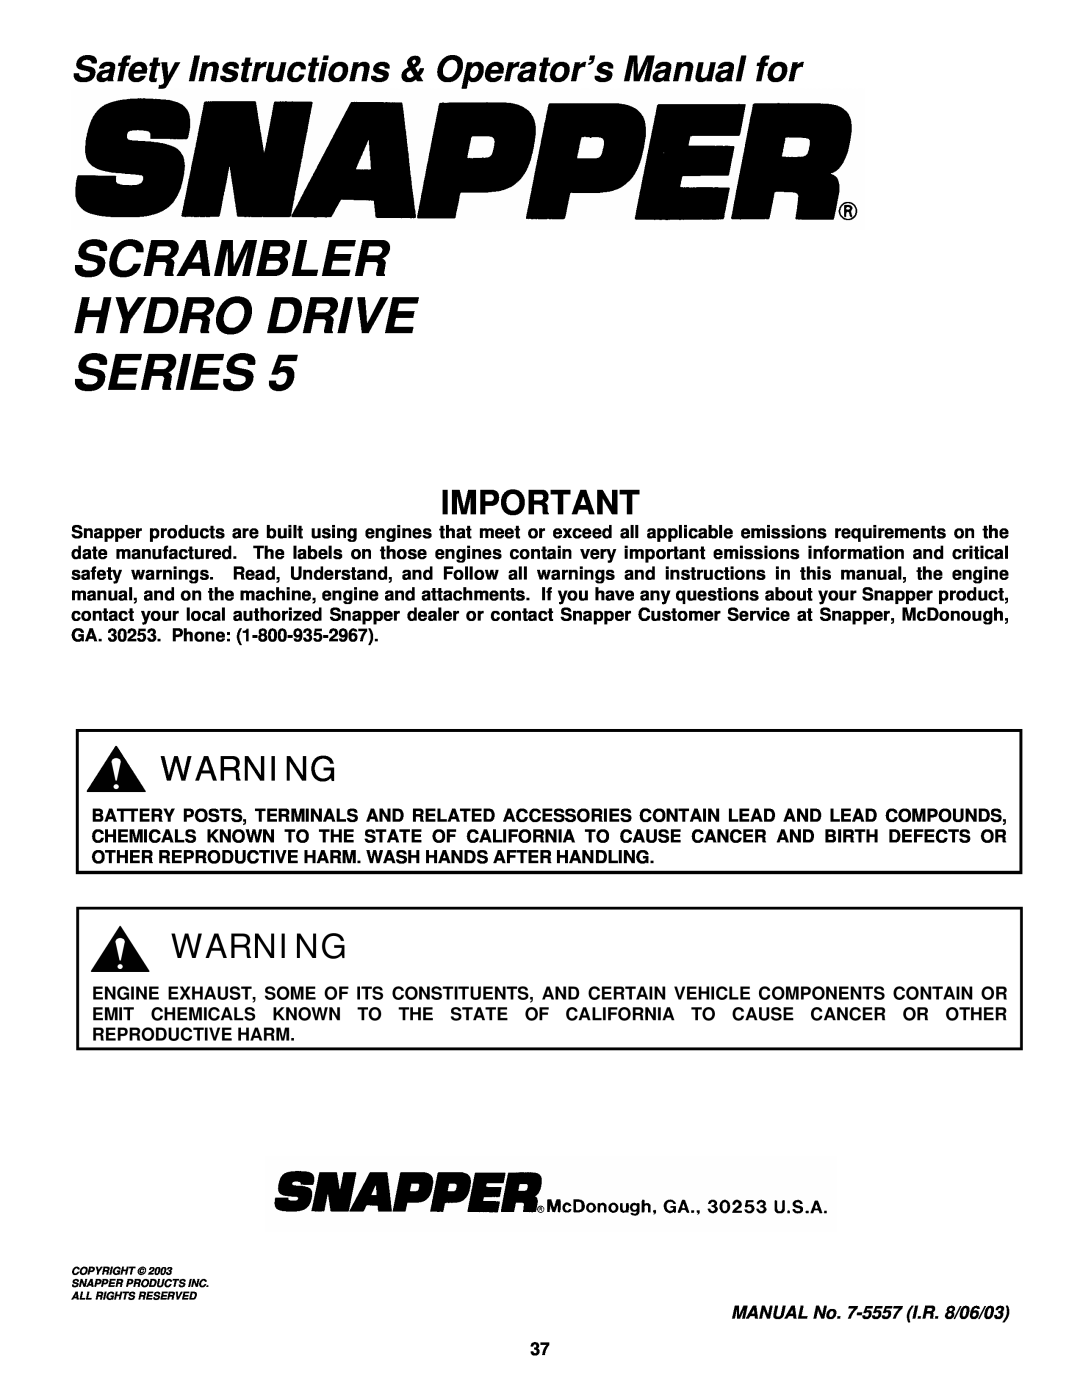 Snapper YZ16385BVE, YZ16385BVE Scrambler Hydro Drive Series, Safety Instructions & Operator’s Manual for 